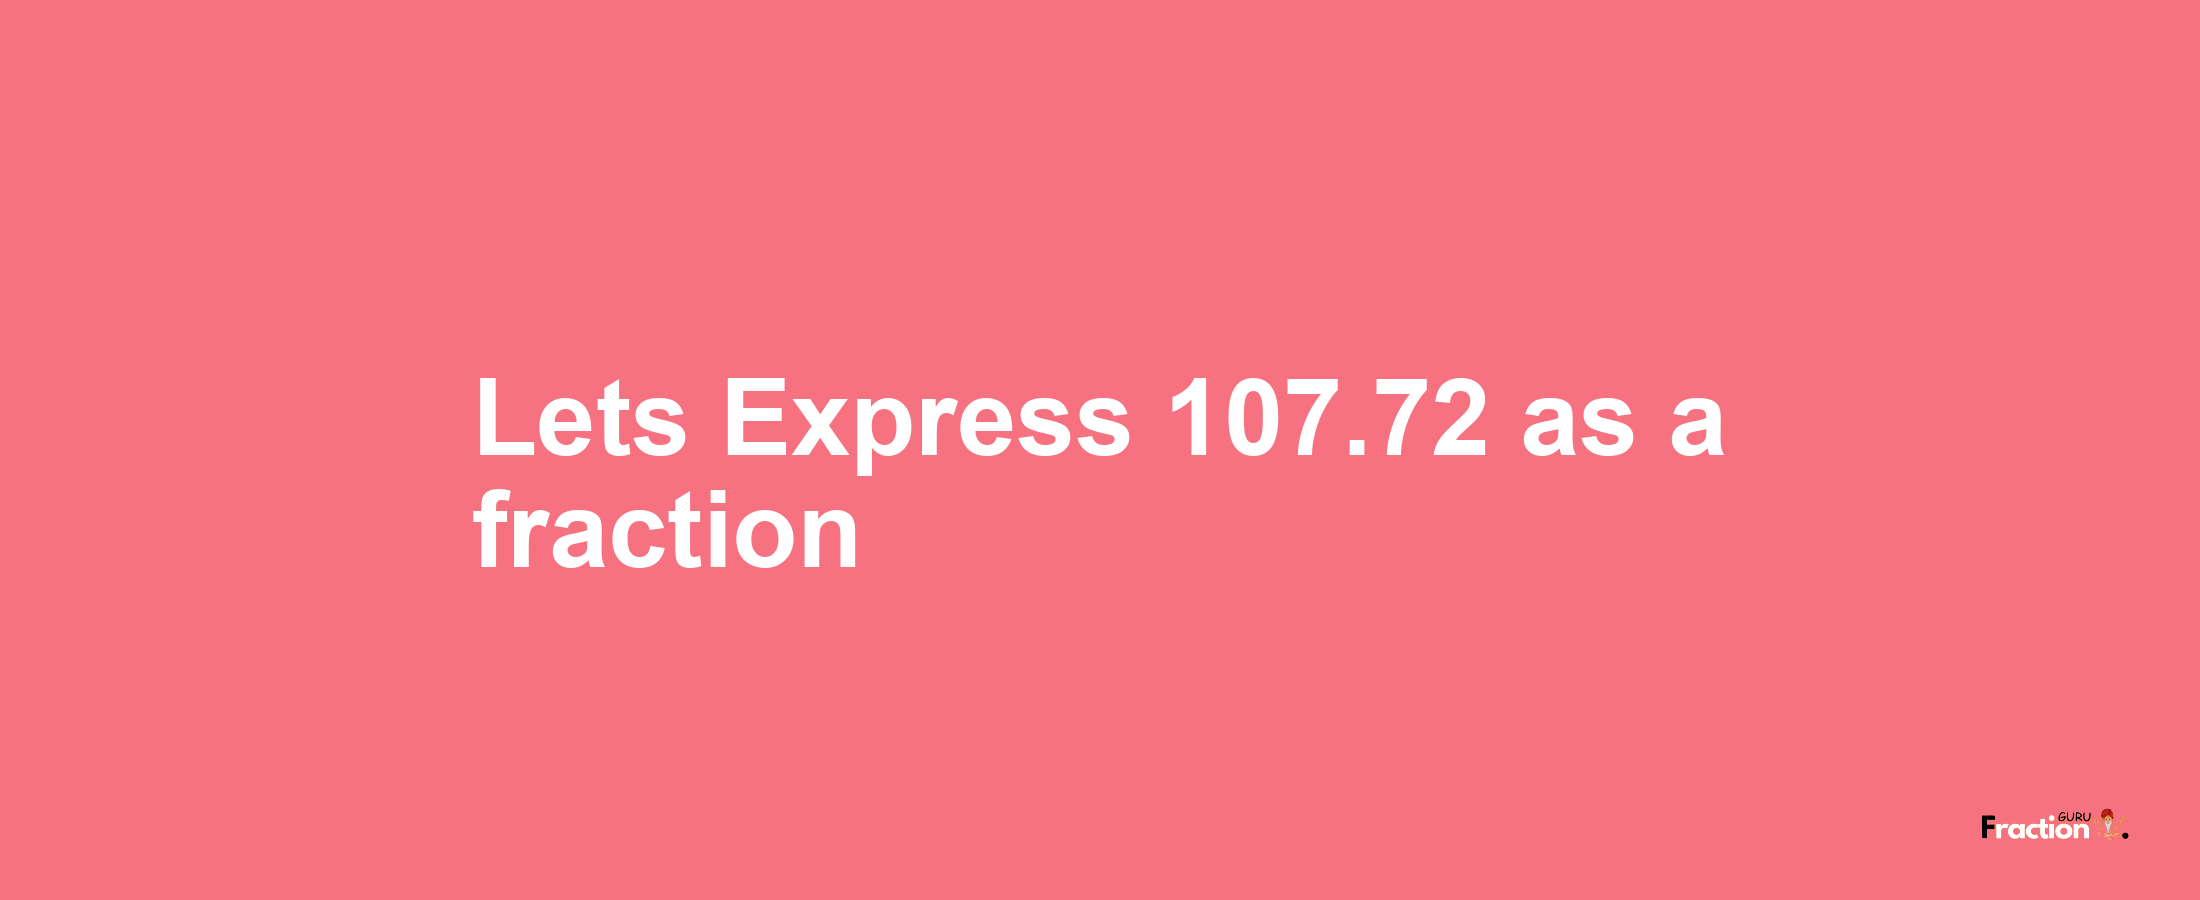 Lets Express 107.72 as afraction